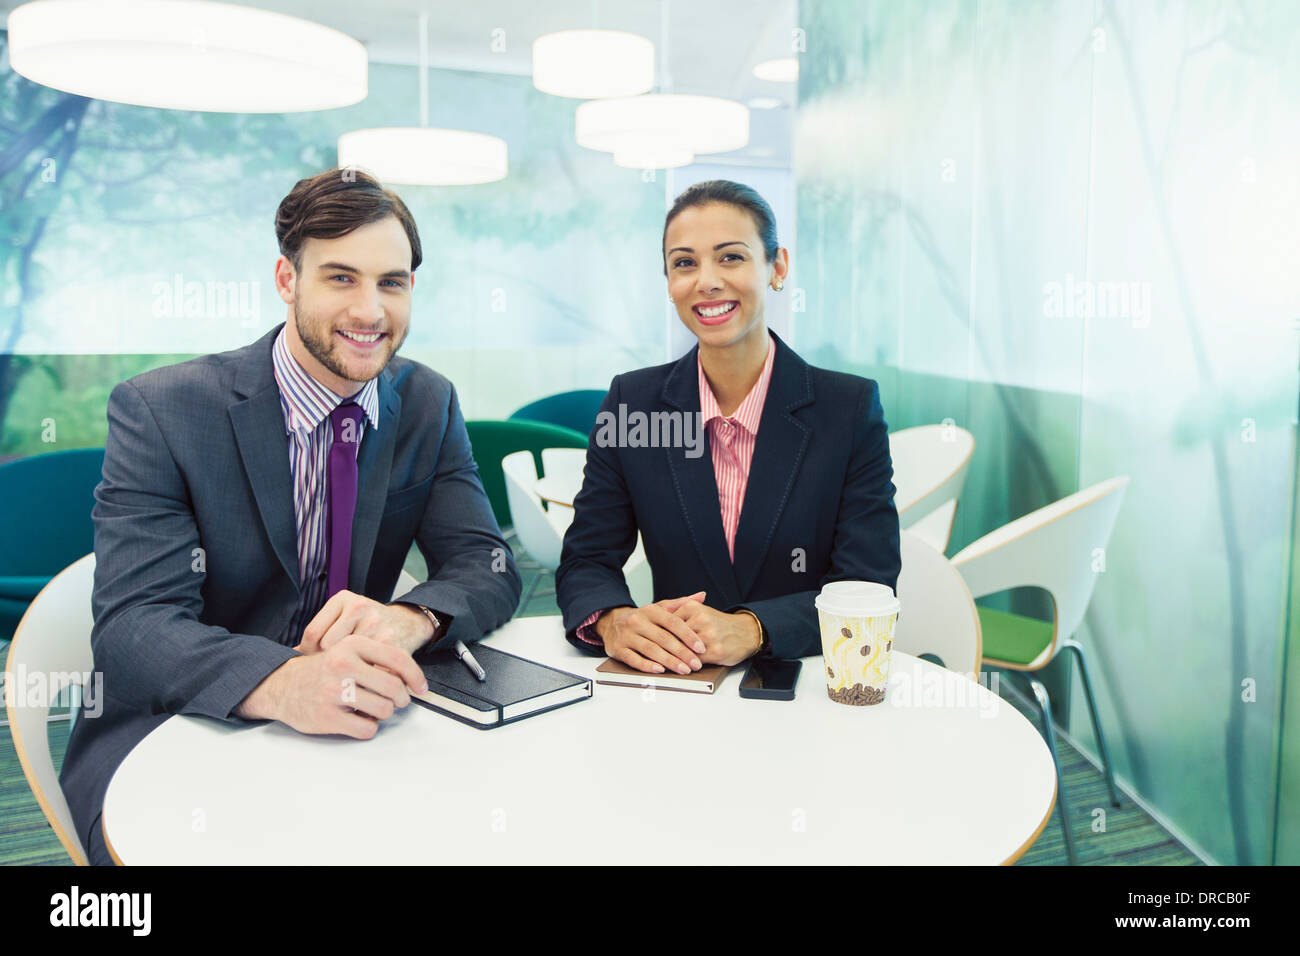 Business people smiling in cafe Stock Photo